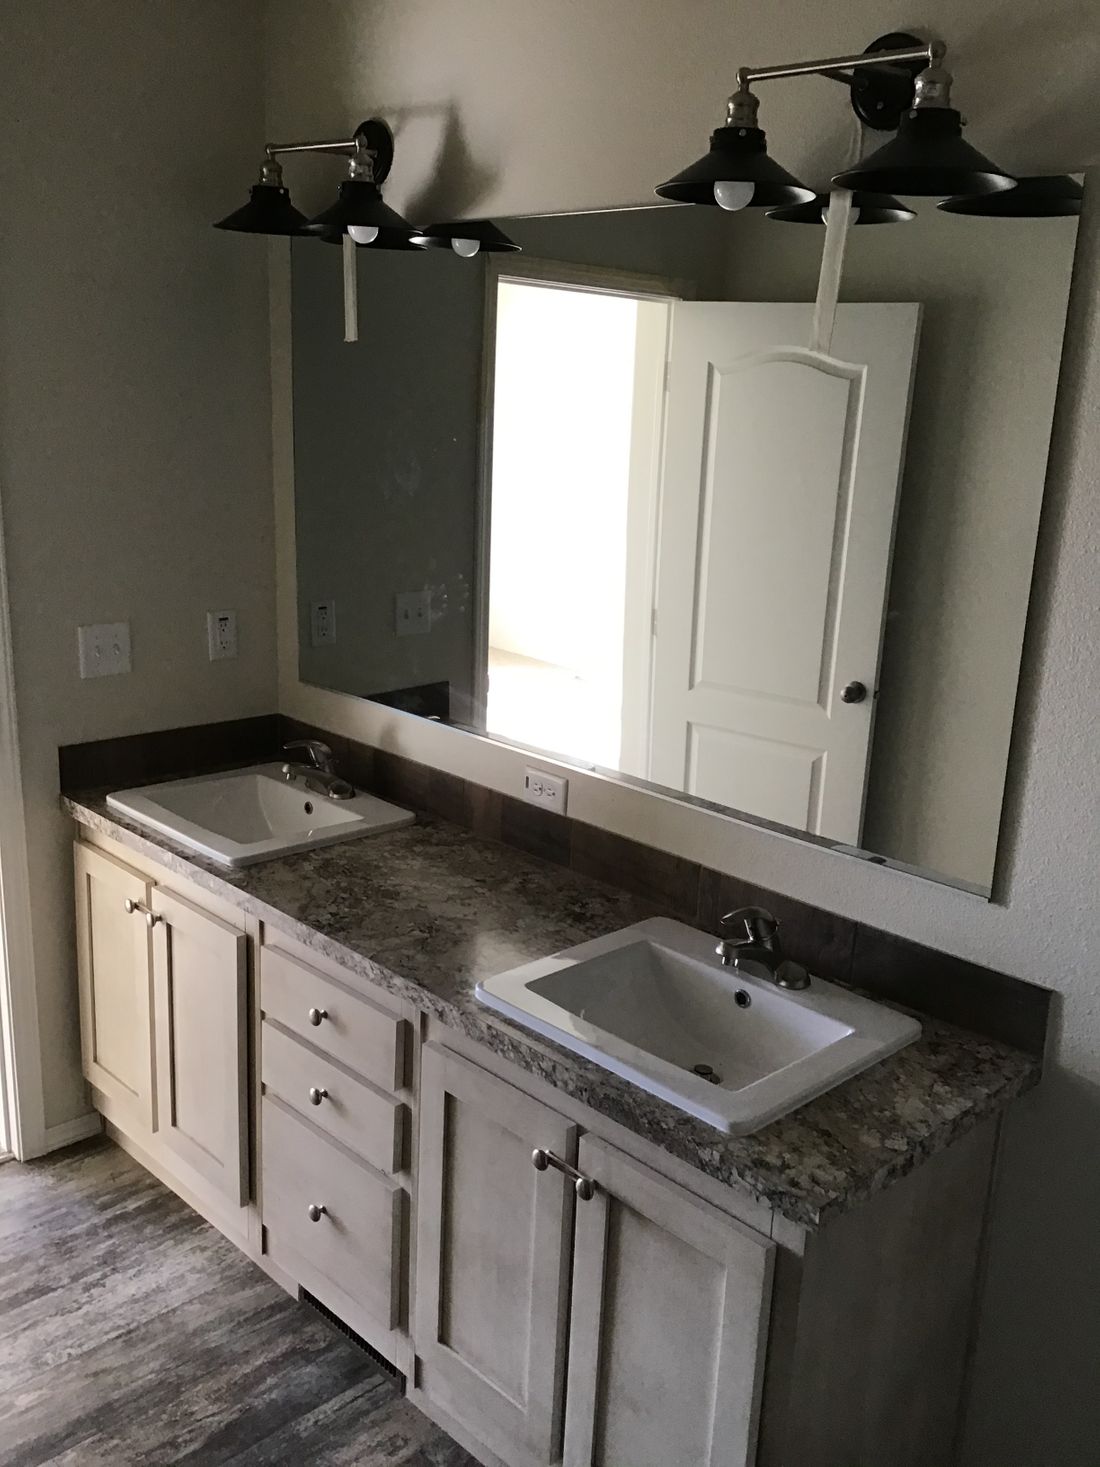 The 2022 COLUMBIA RIVER Master Bathroom. This Manufactured Mobile Home features 3 bedrooms and 2 baths.